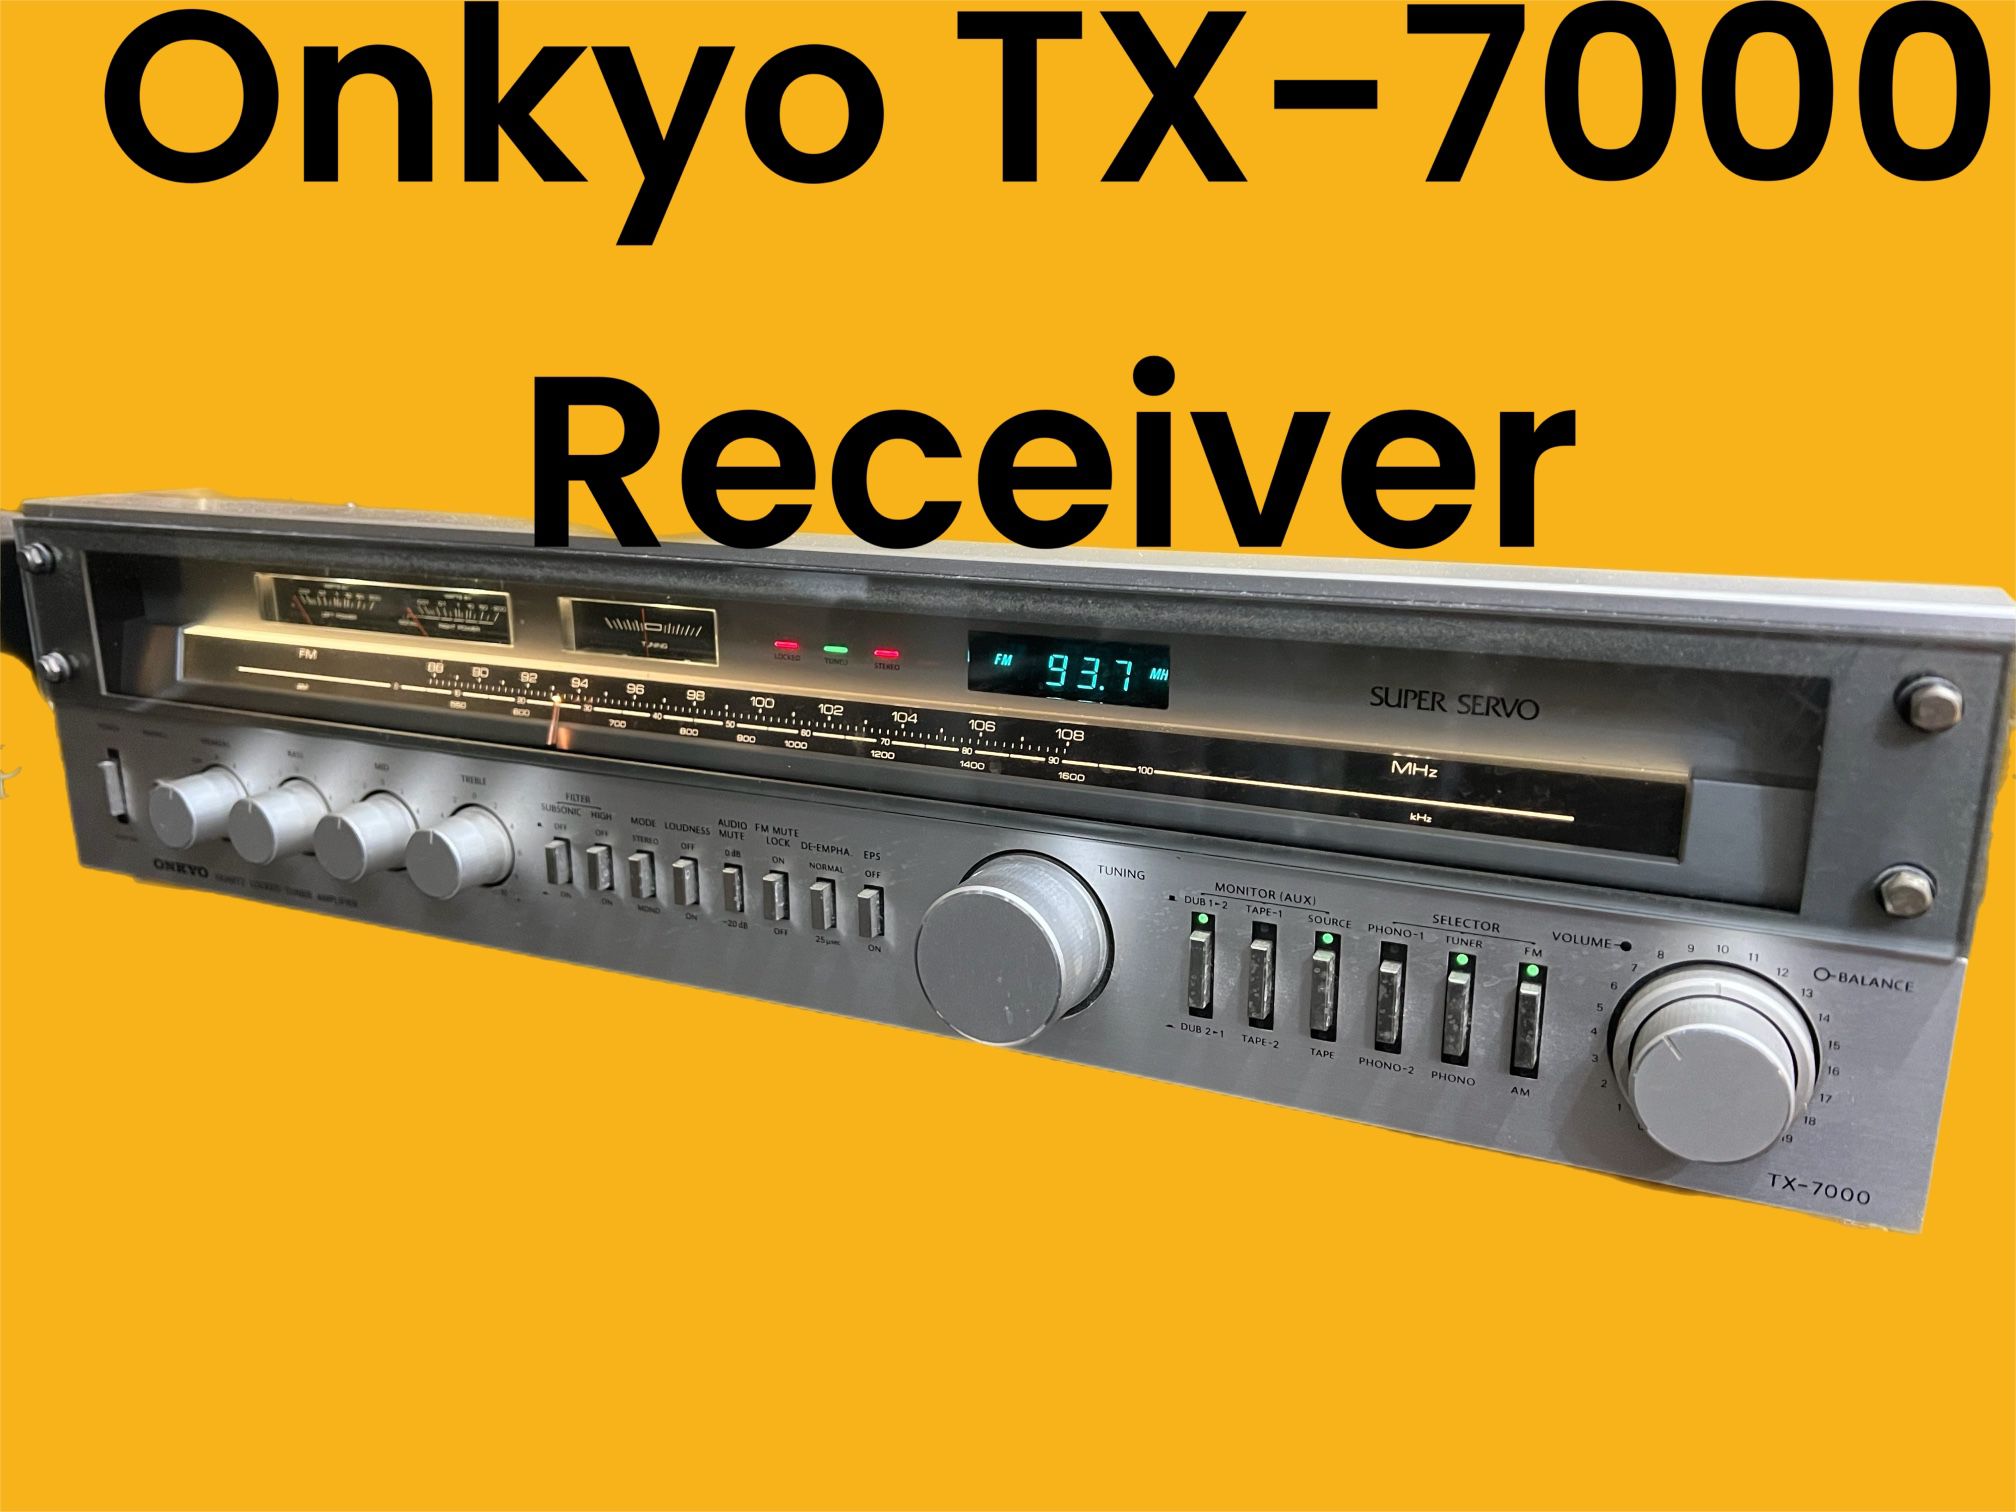 ONKYO Tx-7000 FM/AM Stereo Receiver Audio For Speakers Surround Sound 